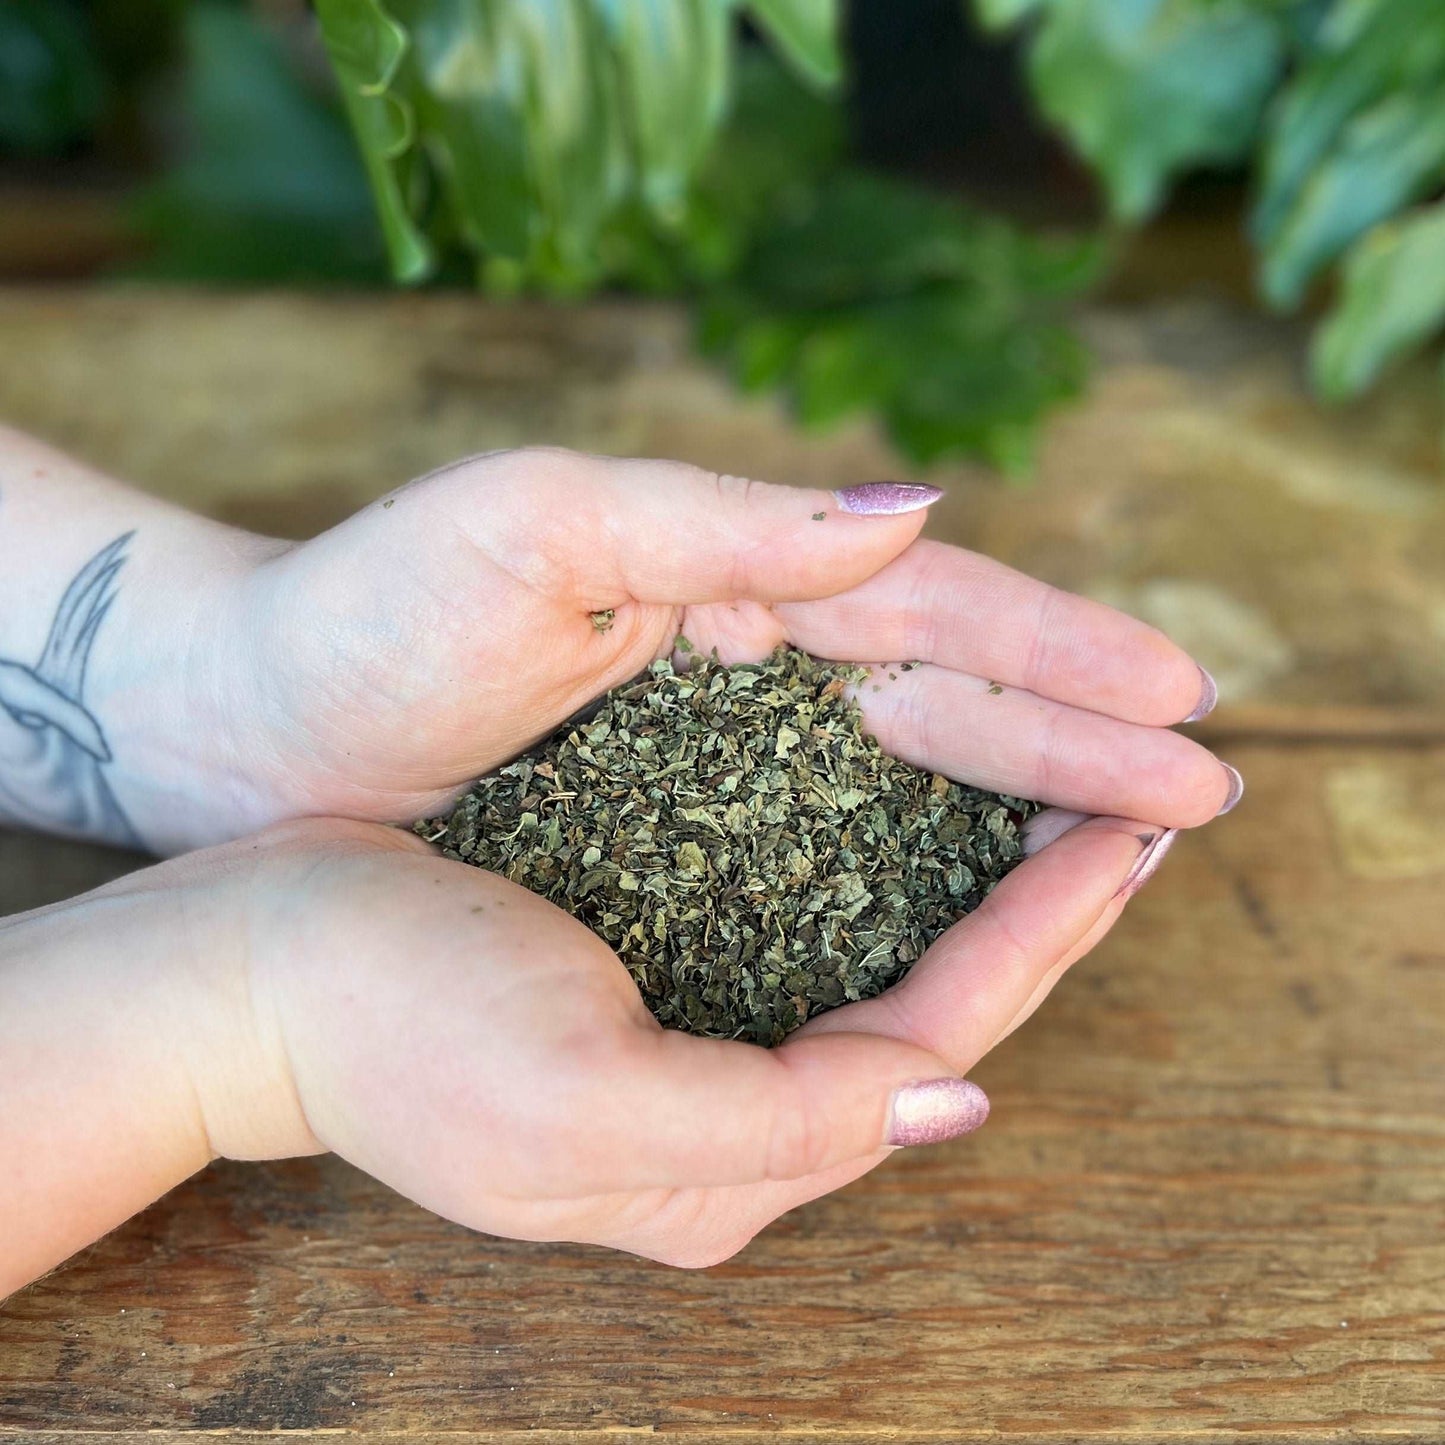 1 ounce Organic Lemon Balm - Embrace the soothing properties of organic Lemon Balm. Revered for its traditional uses, Lemon Balm is believed to bring relaxation, calmness, and promote overall well-being. Immerse yourself in the organic tranquility of Lemon Balm.